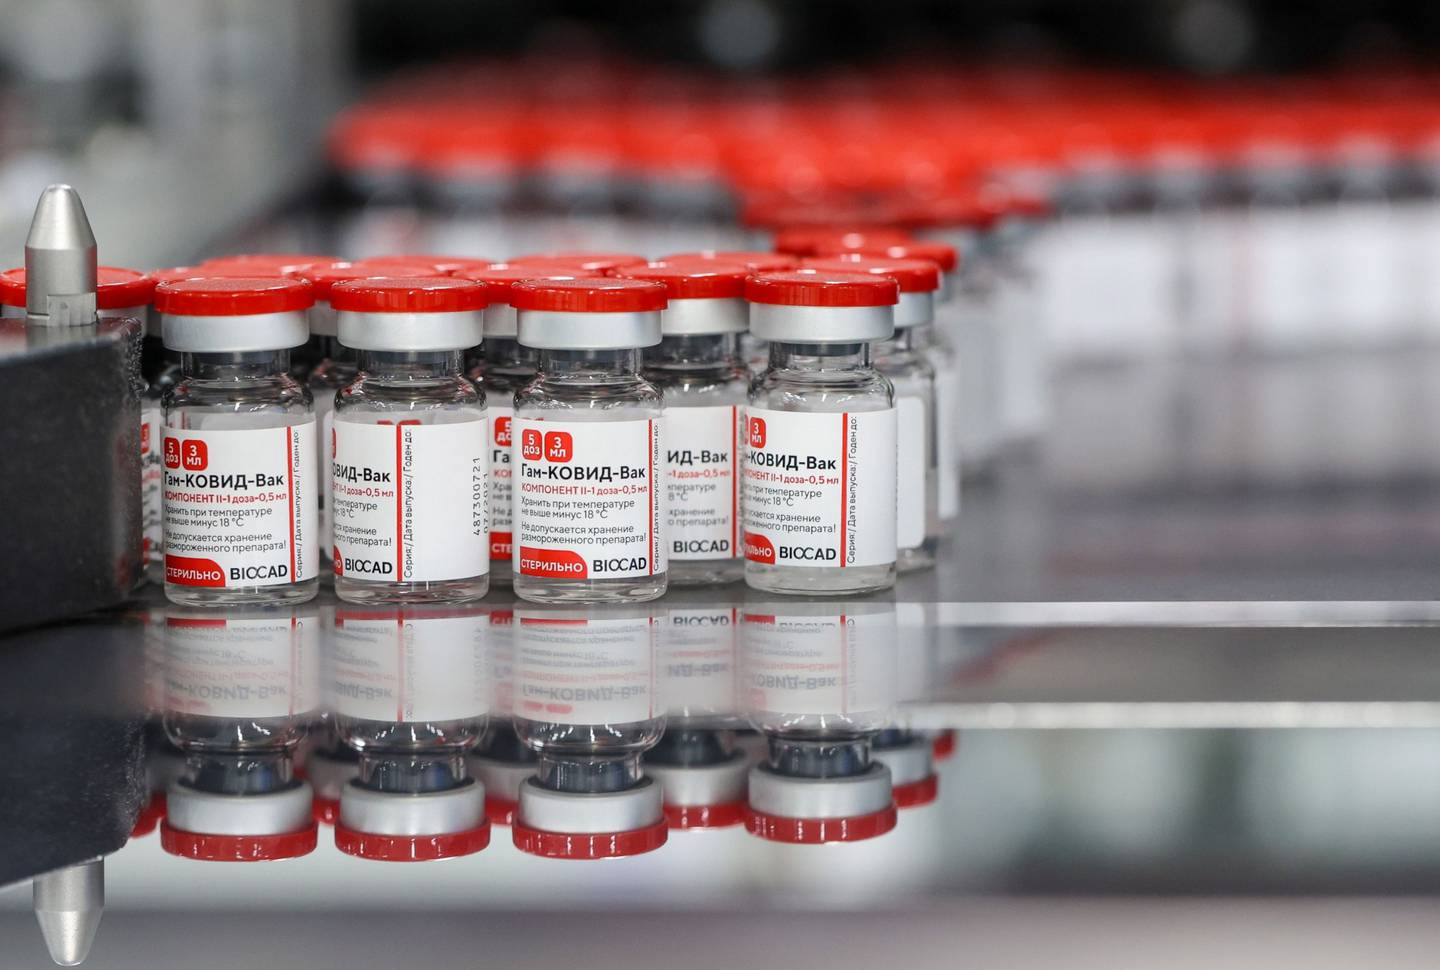 Labelled vials of the Sputnik V Covid-19 vaccine move along the packaging line at the Biocad pharmaceutical factory in Strelna, near St. Petersburg, Russia, on Friday, July 23, 2021. The Argentine government complained to Russia over delays in delivering its Sputnik V vaccine, saying the lack of supplies has left the South American country in a very critical situation, putting the government at risk. Photographer: Andrey Rudakov/Bloomberg